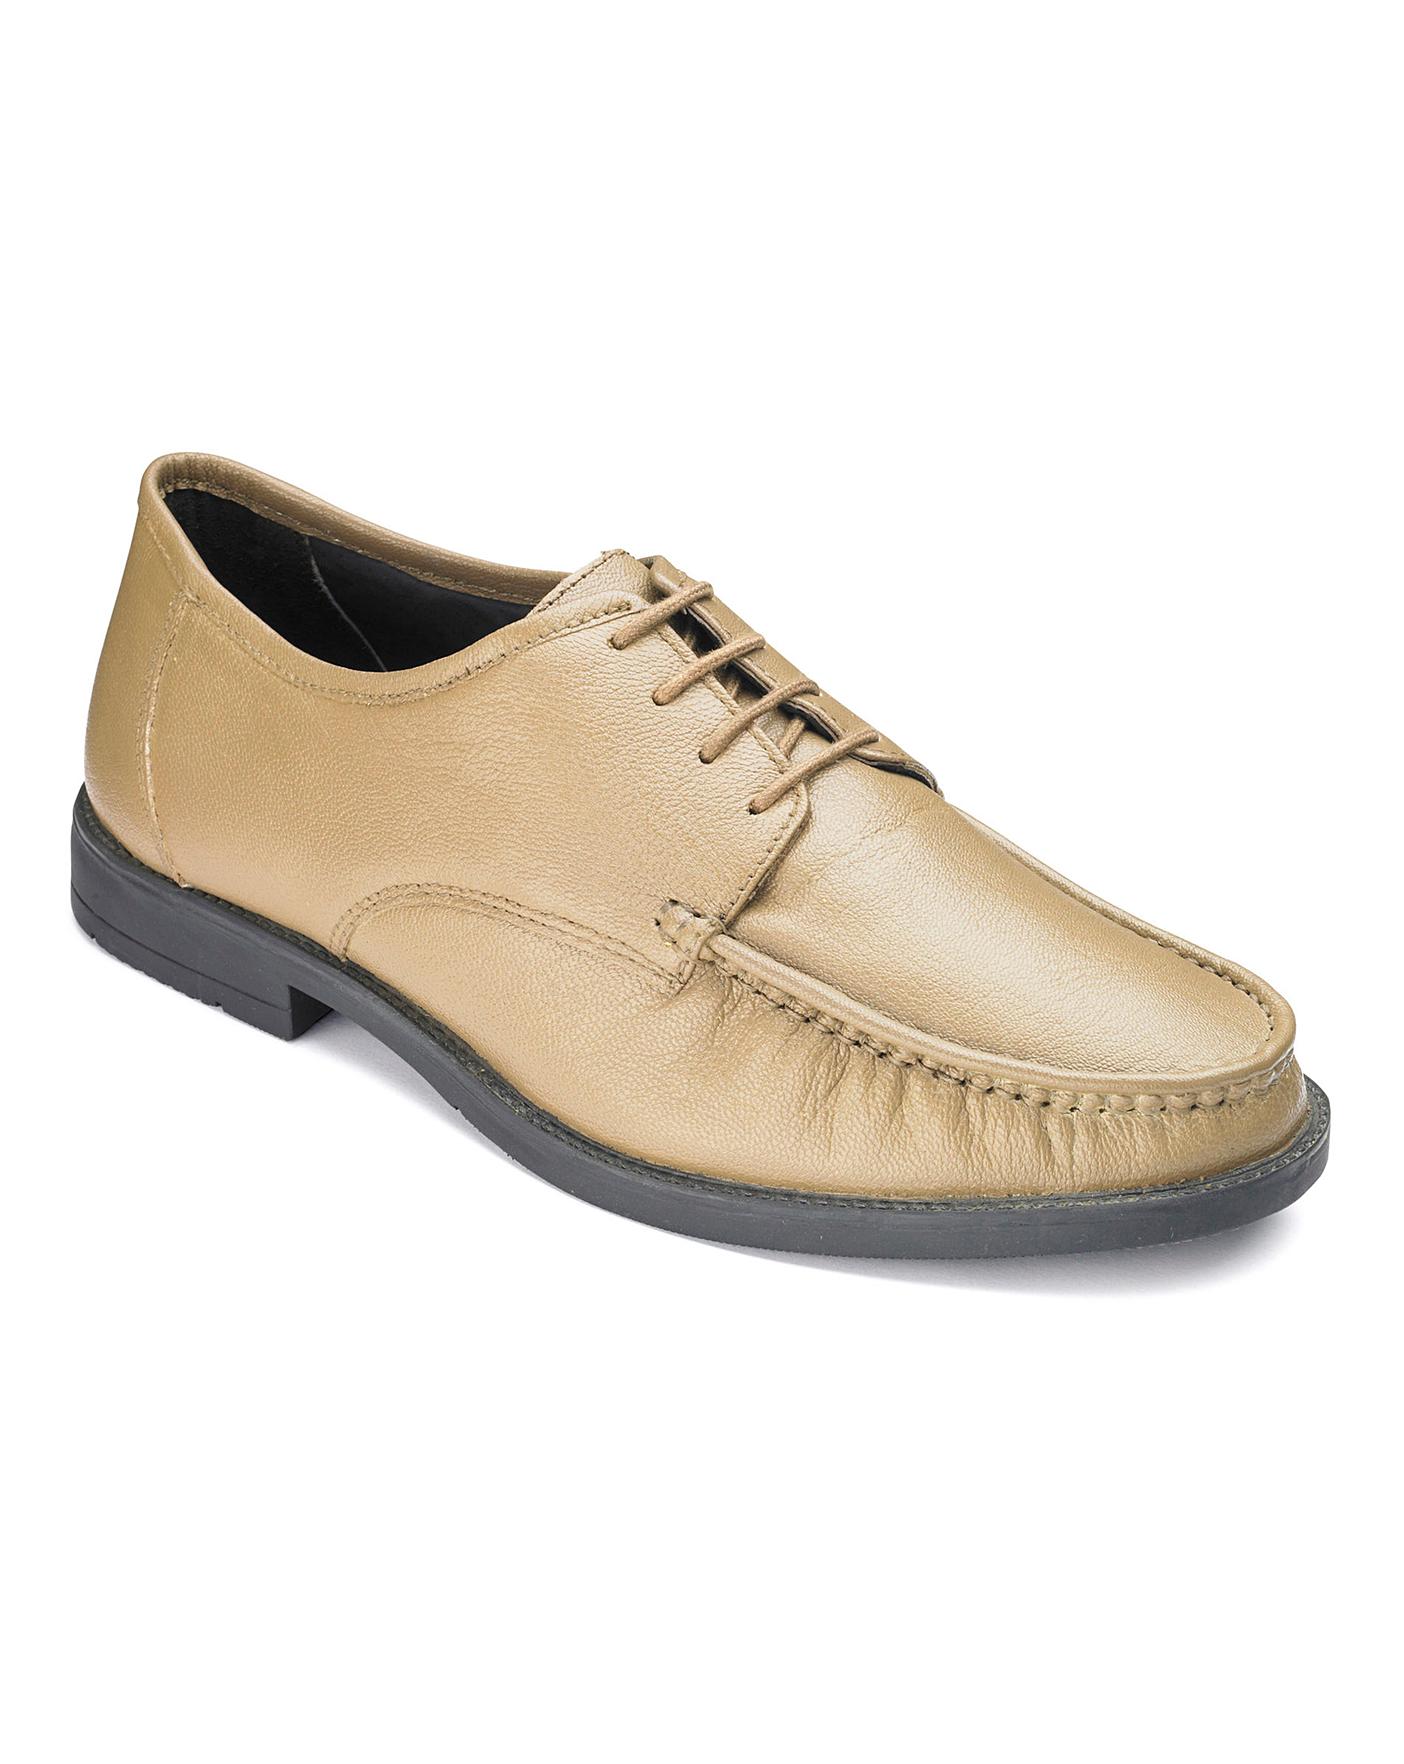 Trustyle Lace Up Shoes Standard Fit